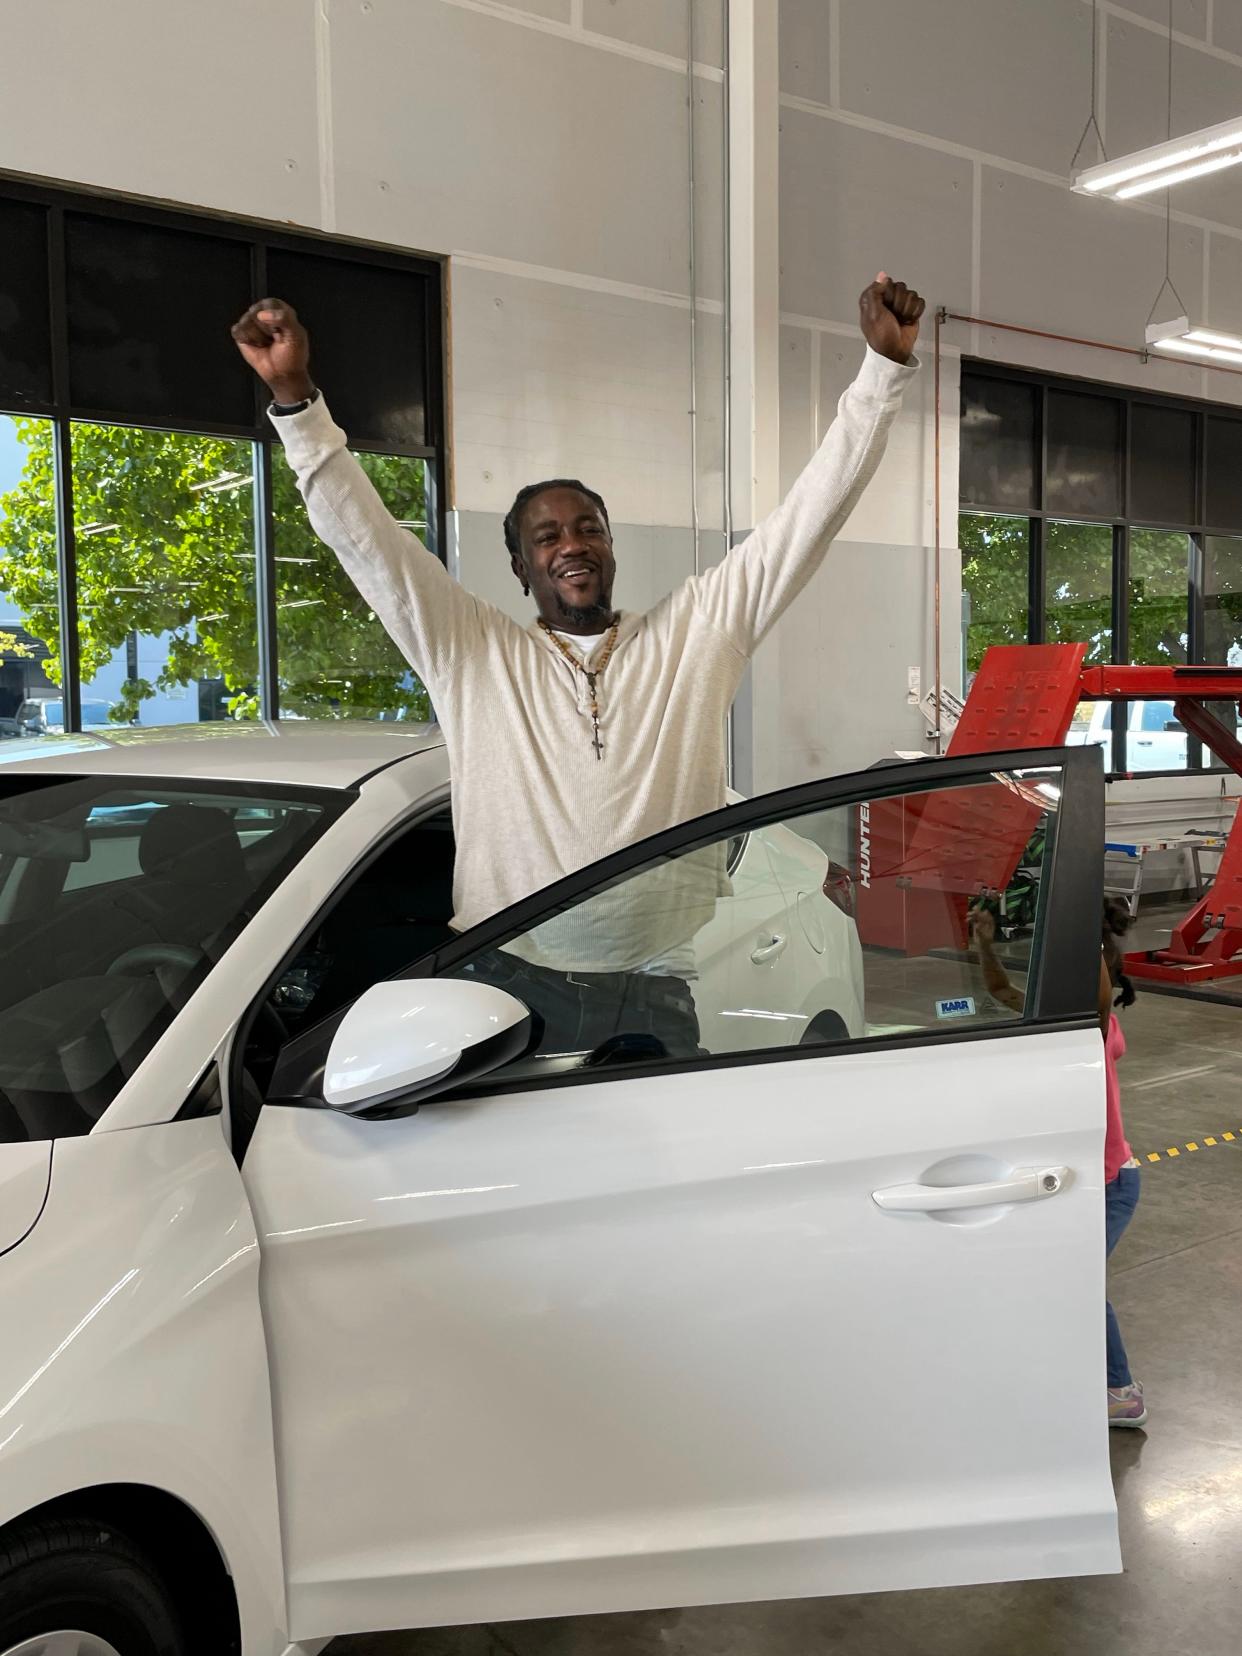 Isaac Taylor, a father of six who previously biked 16 miles roundtrip to work, celebrates after being given a free car.